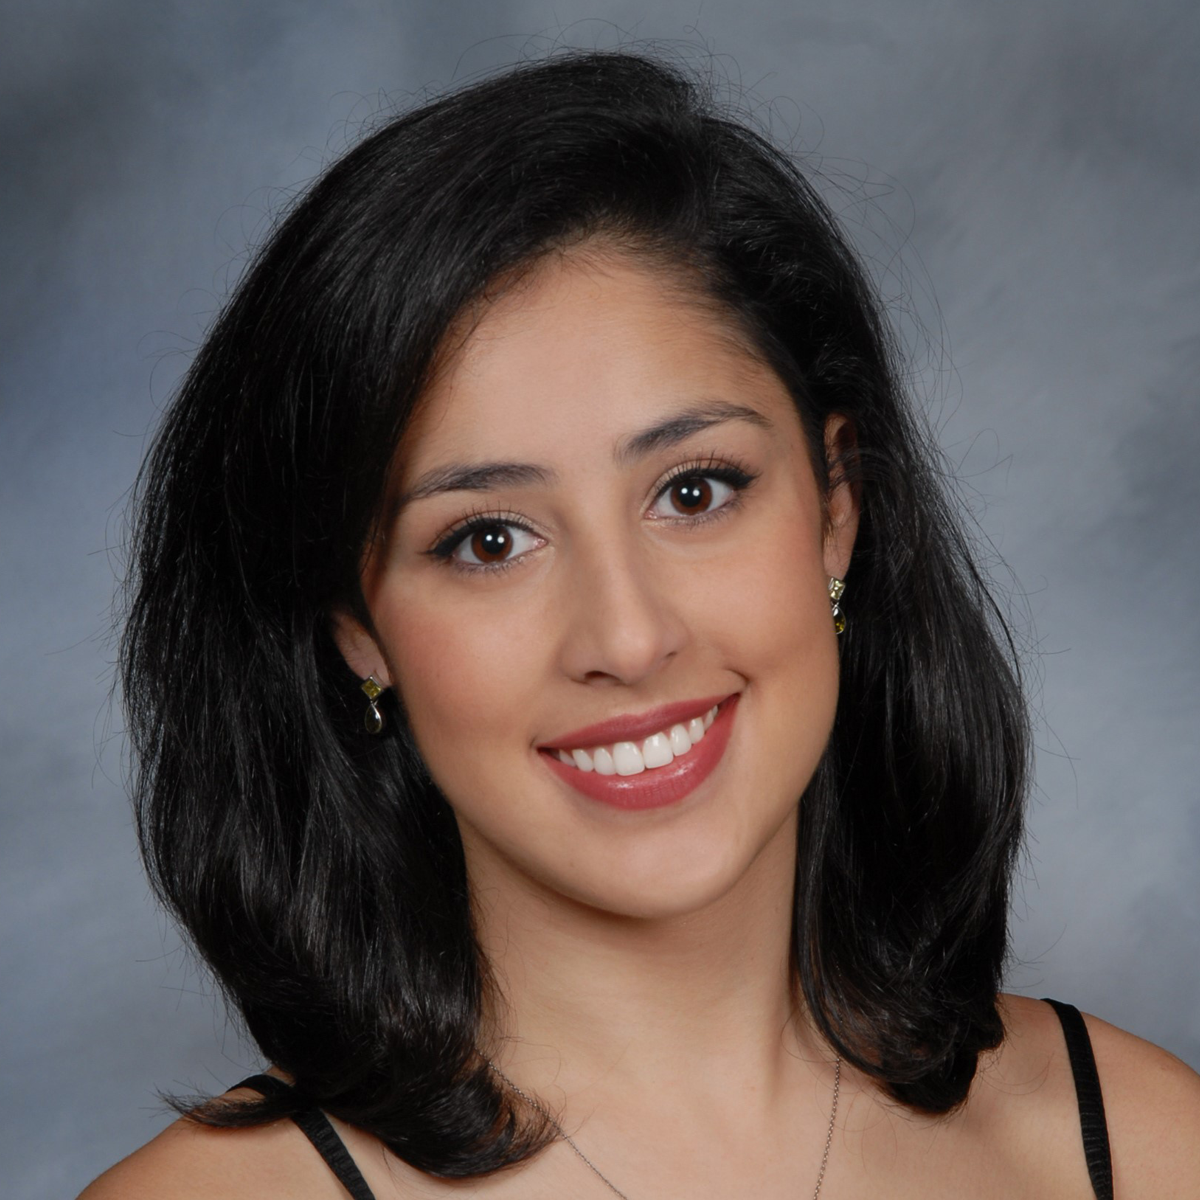 Camila Vargas, medical scholar. She is smiling at the camera and is against a light gray photography studio background.